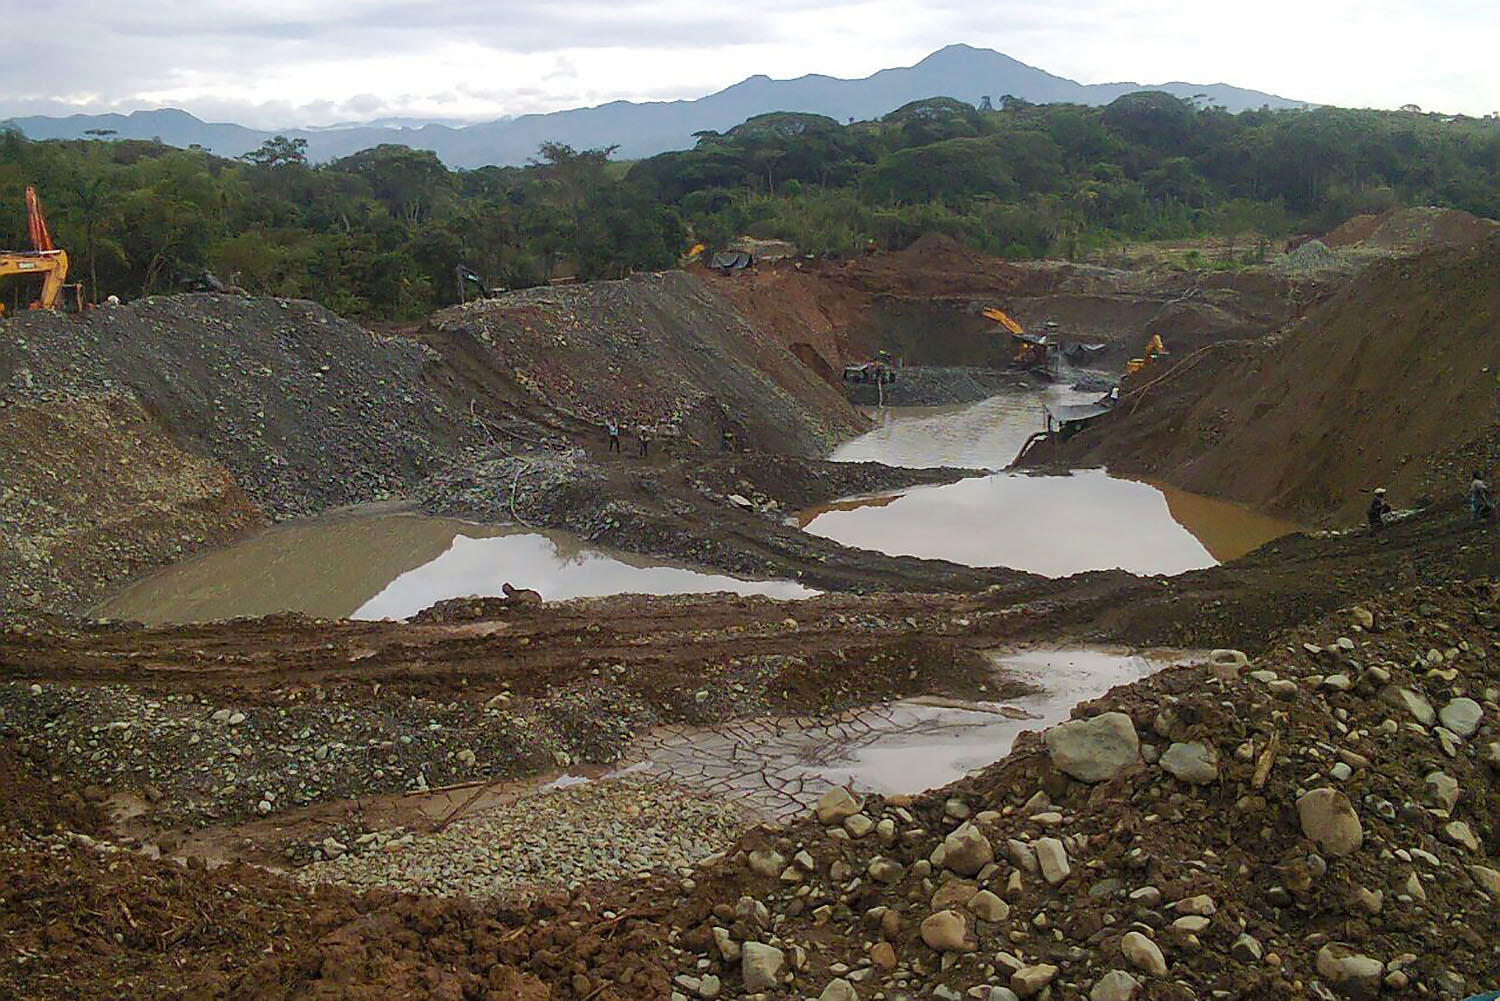 The aftermath of an illegal gold mining operation scars the land in Santander de Quilichao, Cauca. (Photo by Lady Castro.)